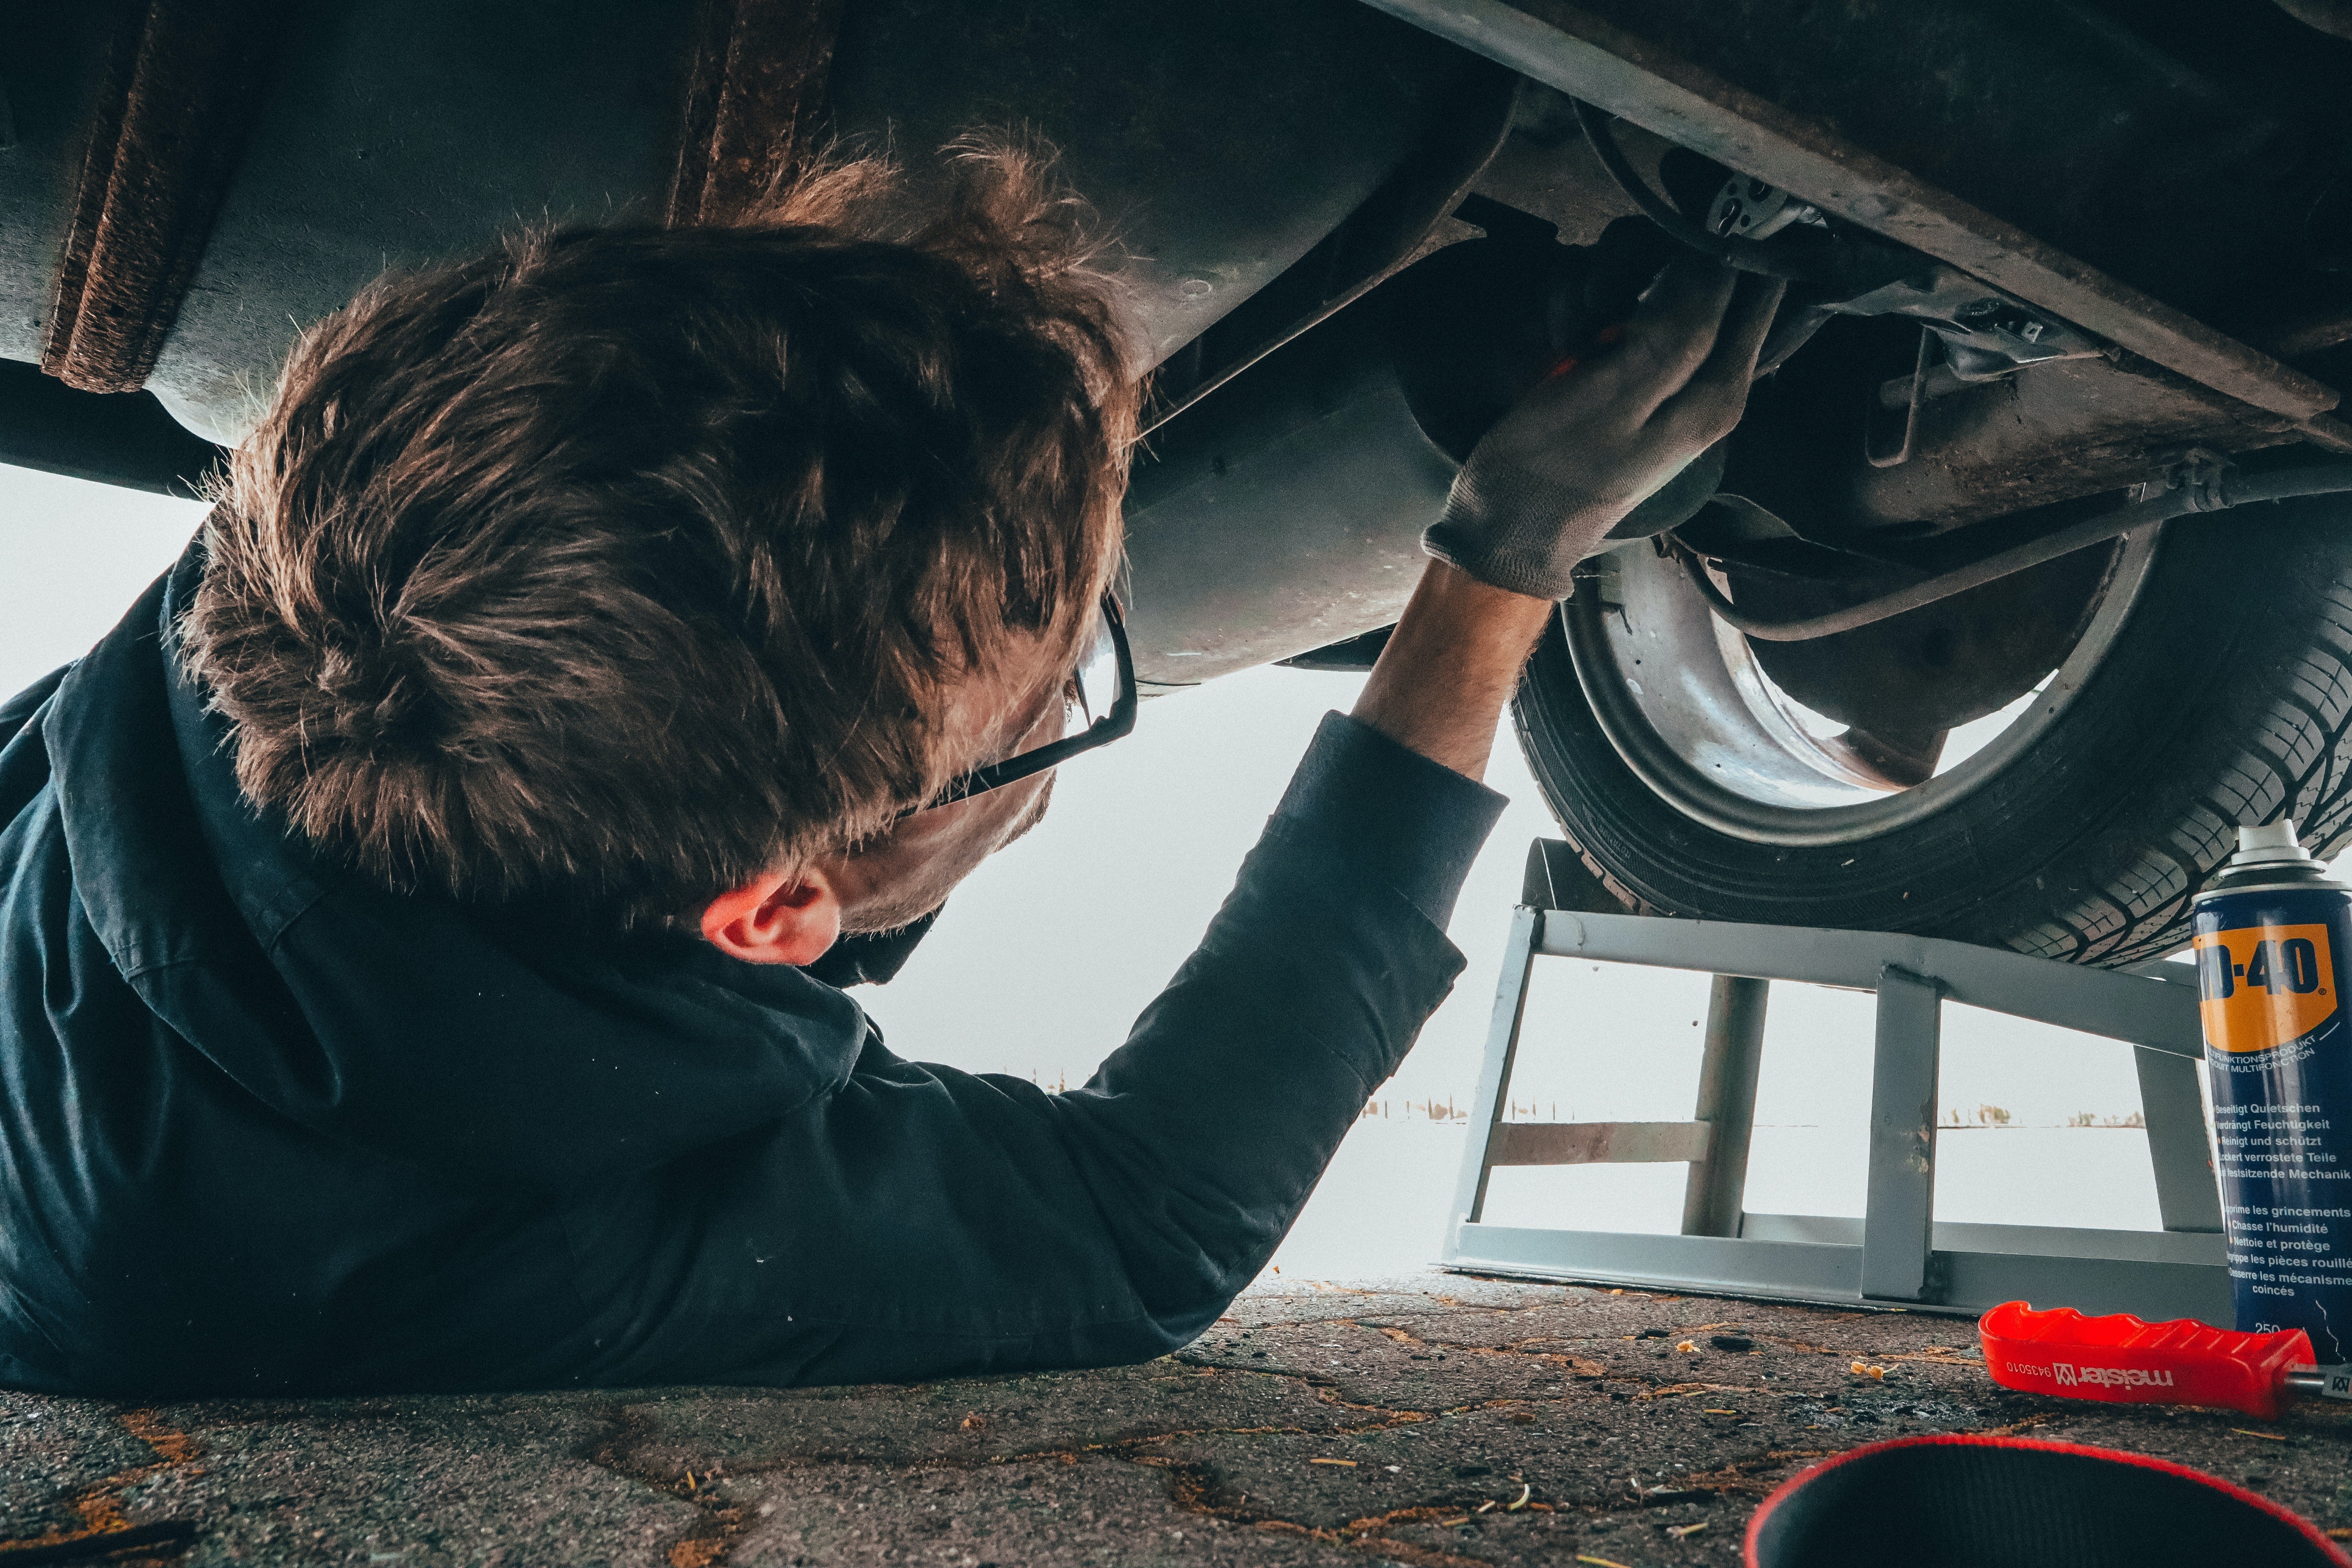 Luke brought Todd into the garage one day taught him the basics of repairing a car. | Source: Pexels